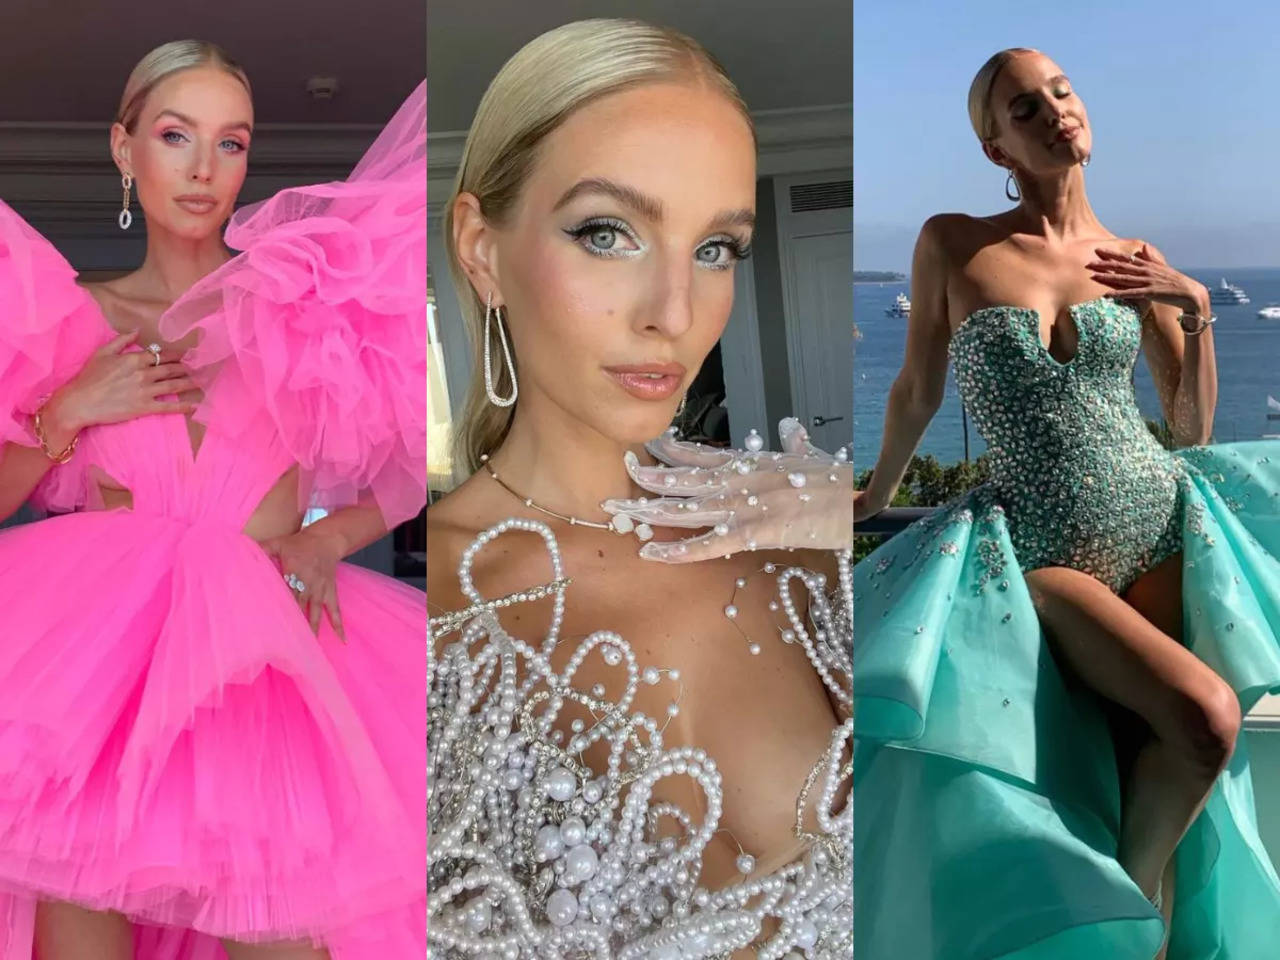 The most extravagant and glamorous outfits from the Cannes Film